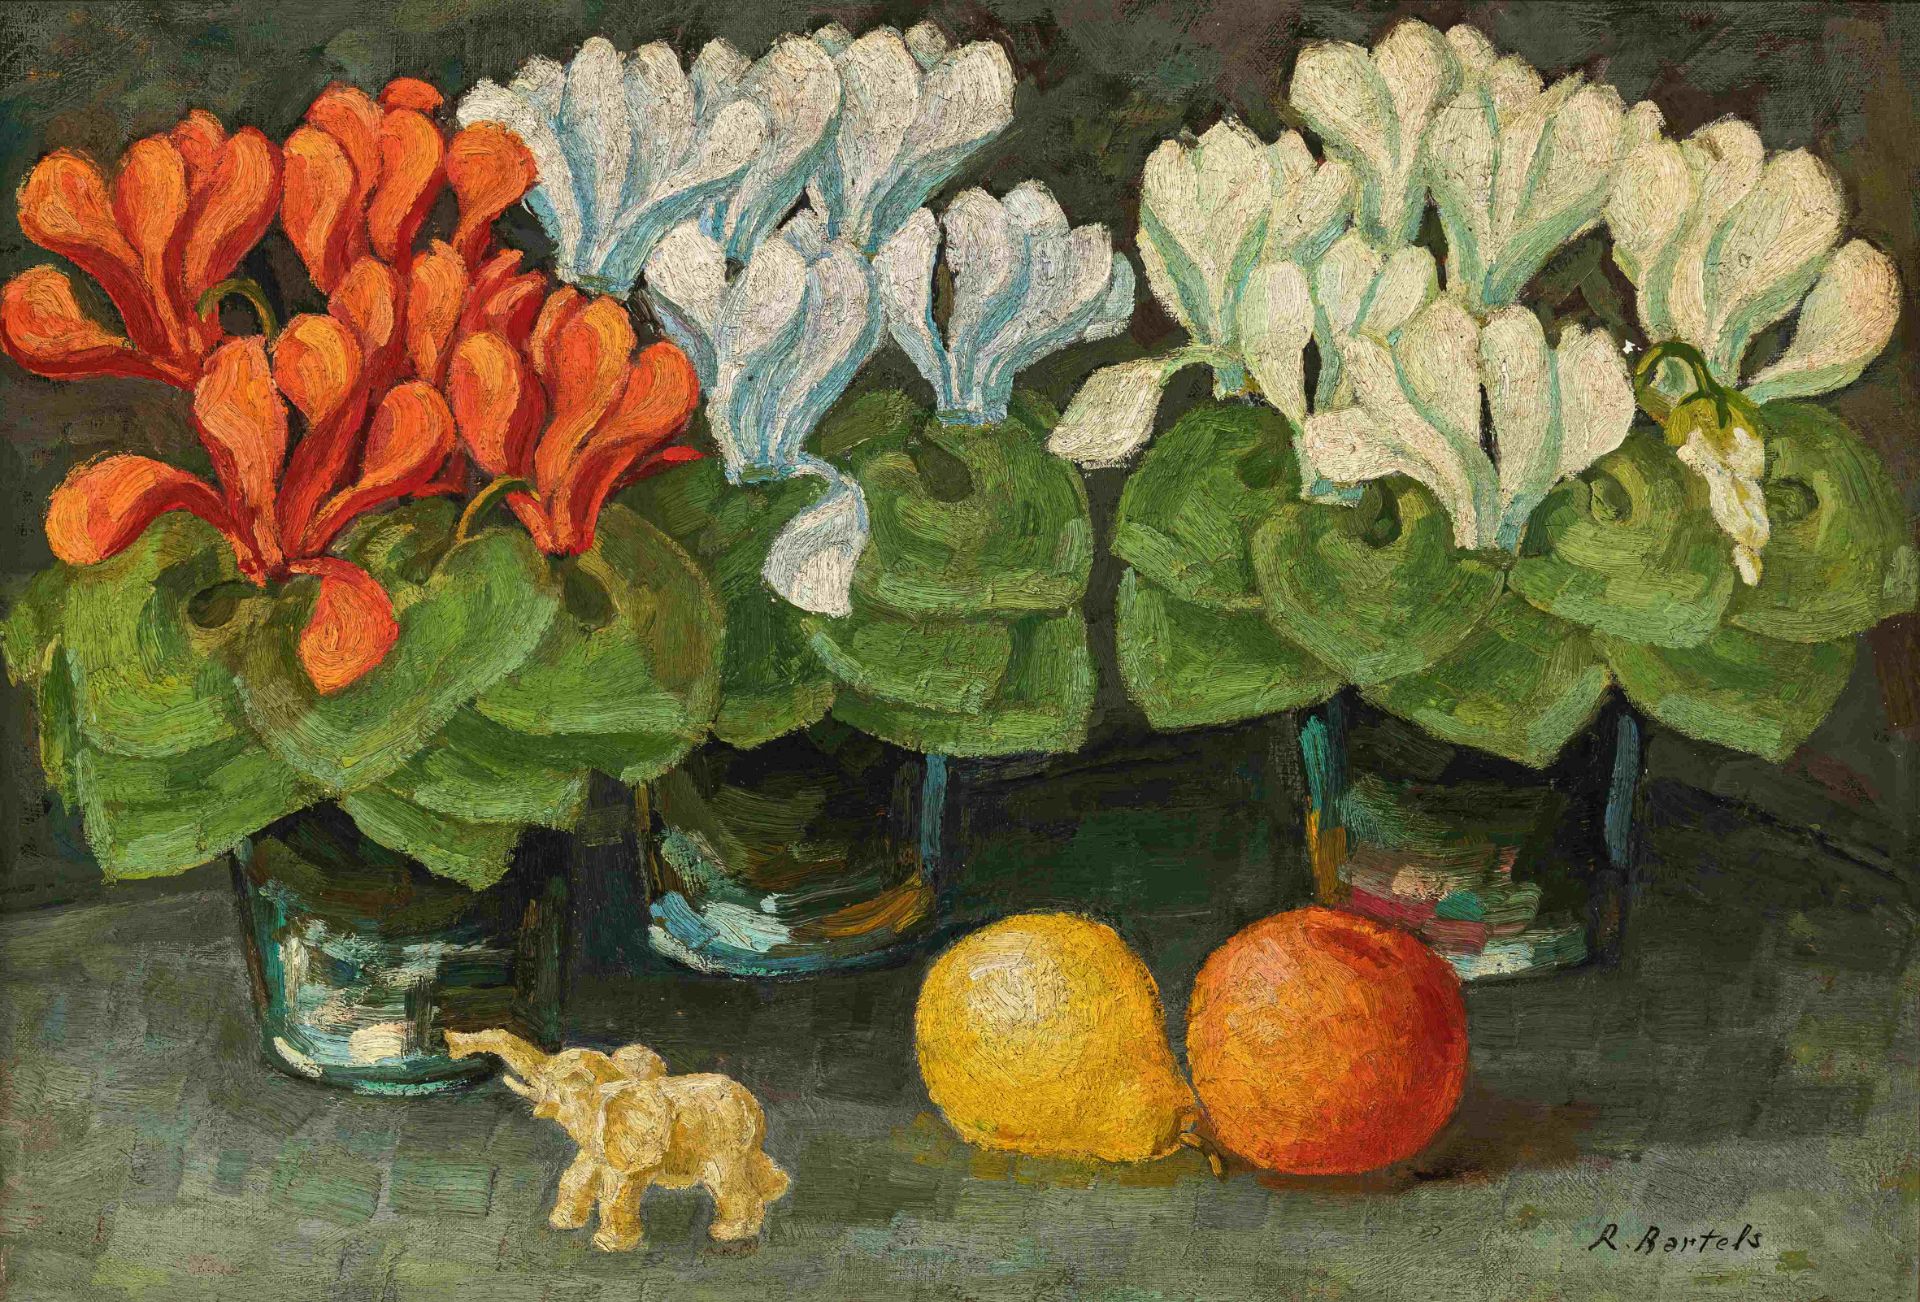 Rudolf Bartels - Still life with cyclamen, citrus fruits and a figure of an elephant